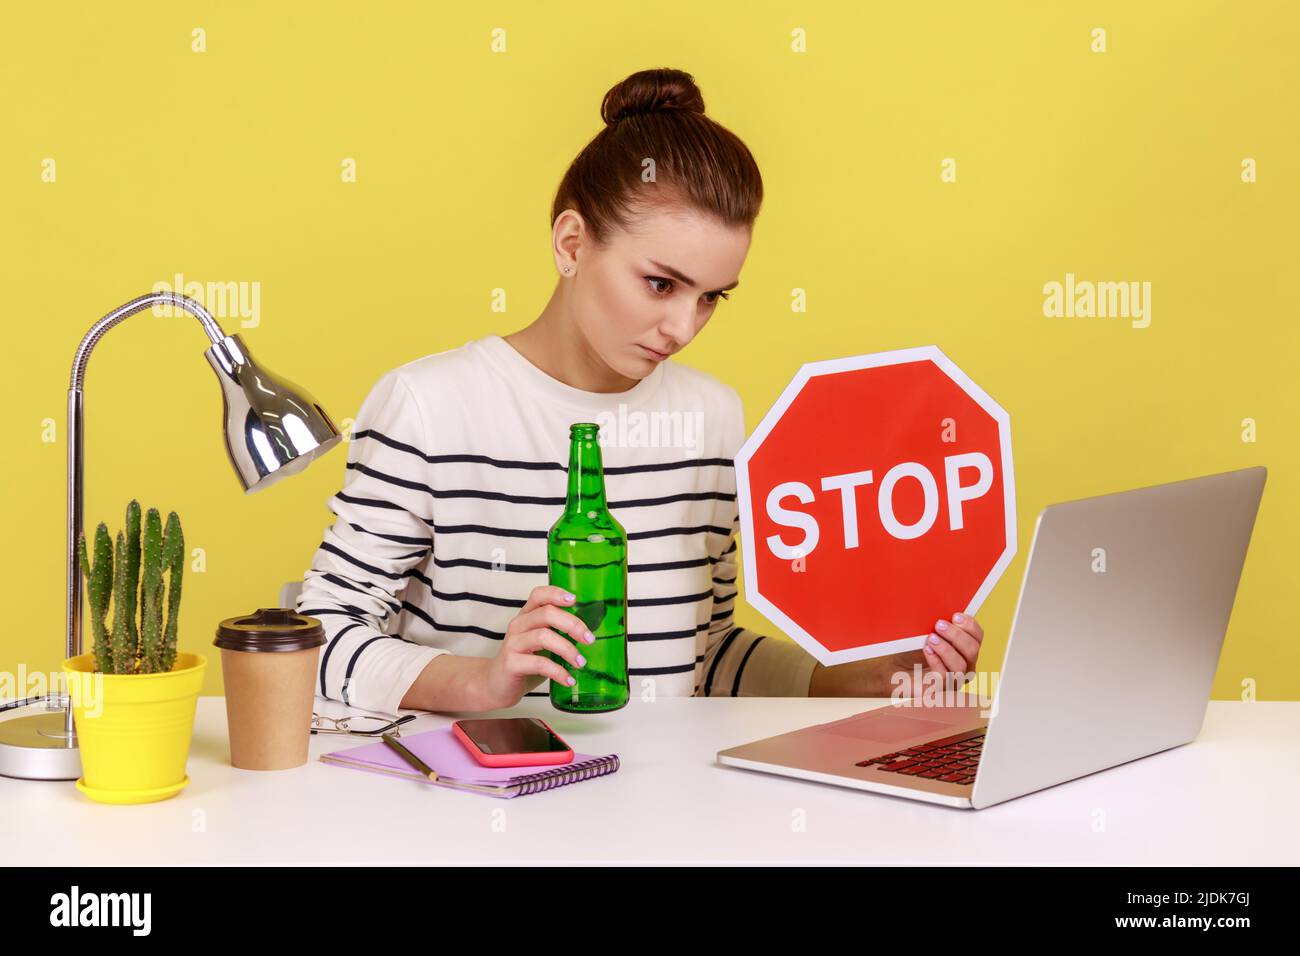 Woman office worker in striped shirt sitting on workplace and having video conference, showing alcohol bottle and red stop sign, Indoor studio studio shot isolated on yellow background. Stock Photo